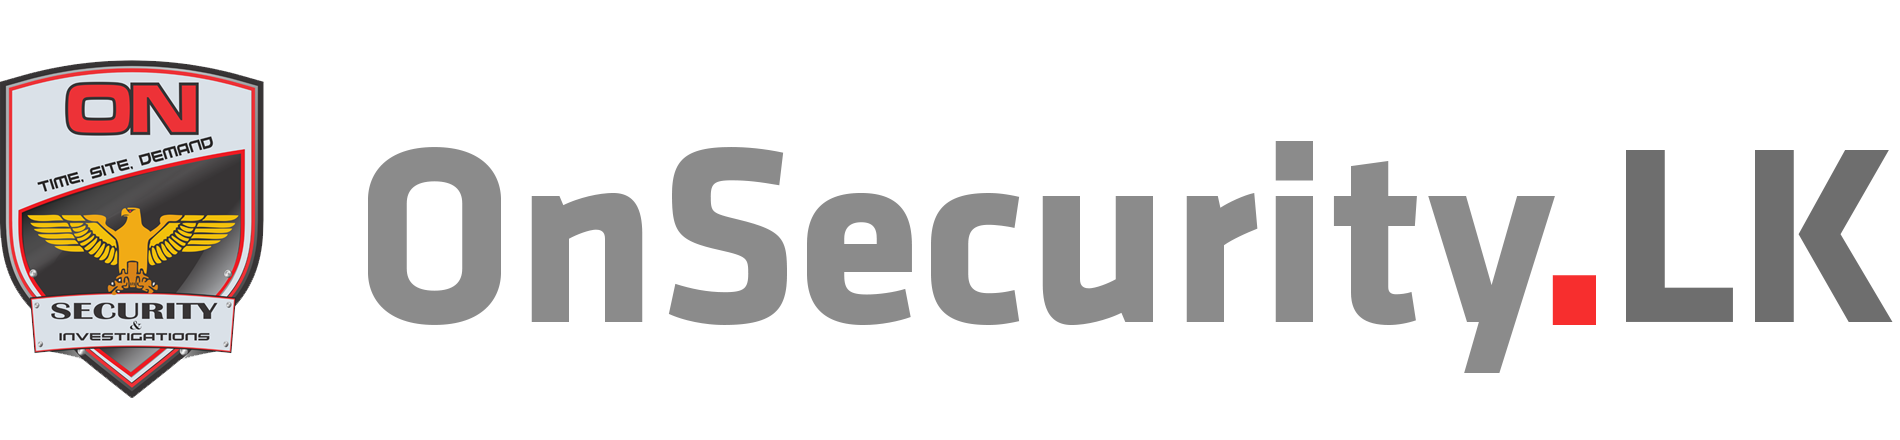 On Security